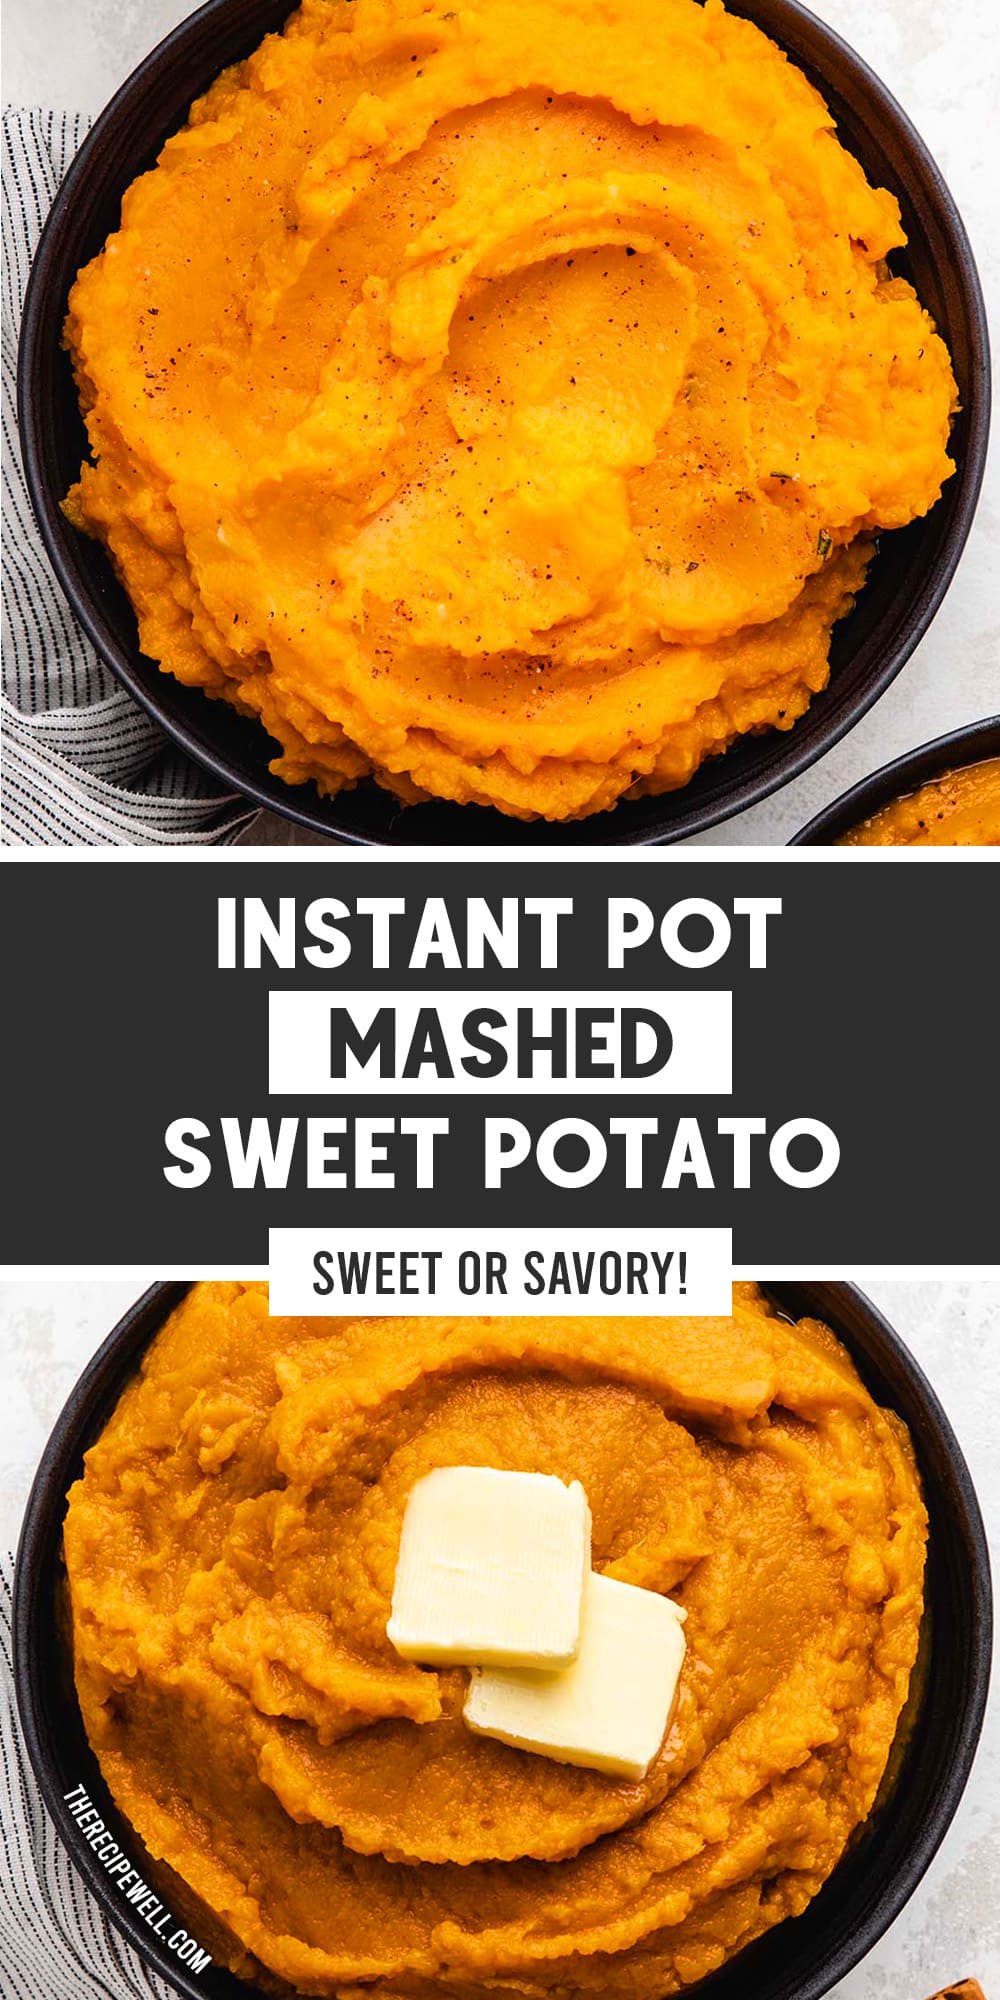 Instant Pot Mashed Sweet Potatoes are an easy and delicious side dish that add a pop of colour to any meal. Make it sweet (brown sugar cinnamon) or savoury (garlic rosemary)! via @therecipewell